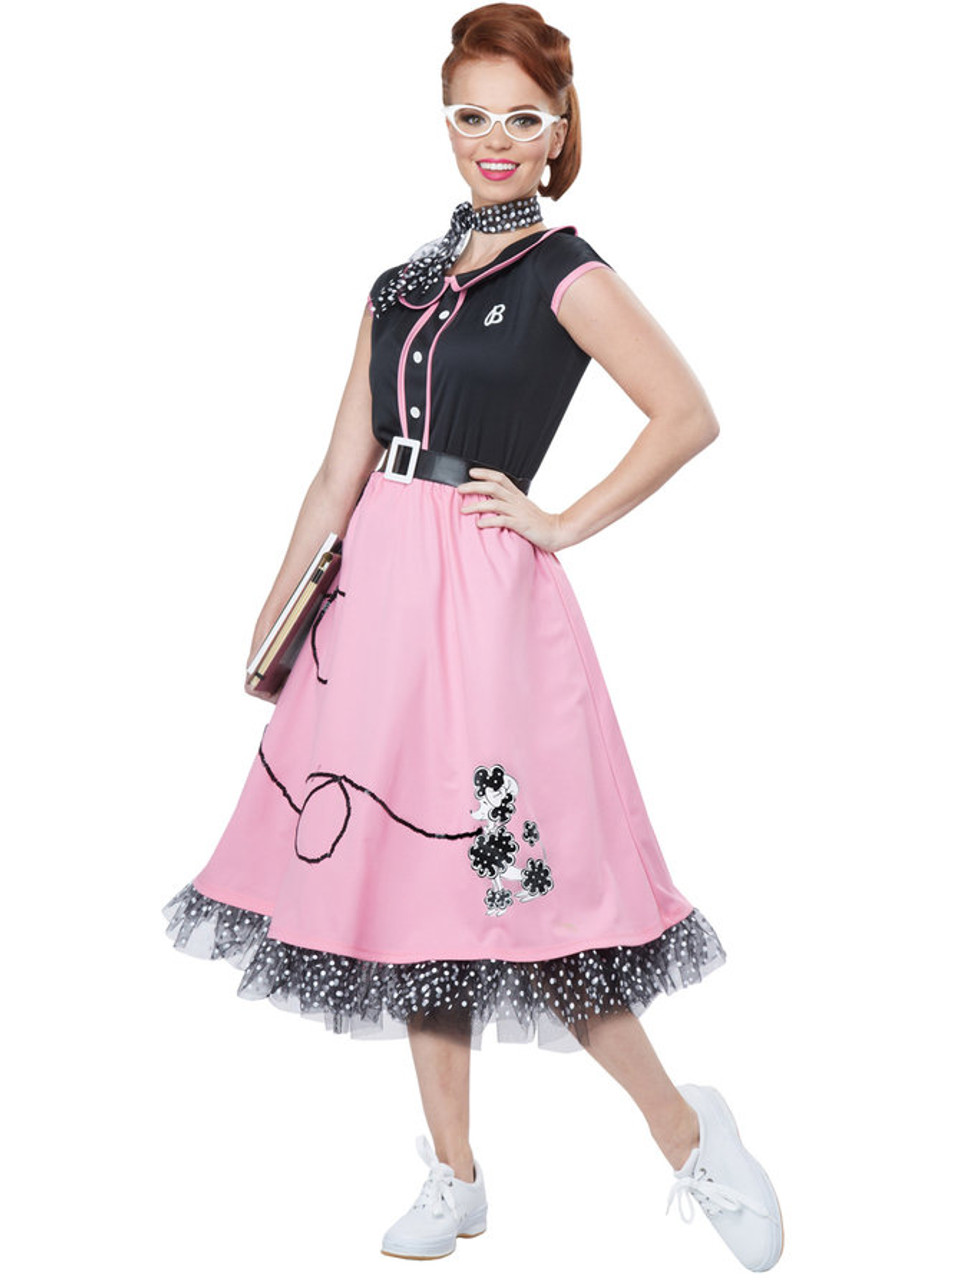 50s Poodle Skirt Sweetheart Women's Costume - The Costume Shoppe